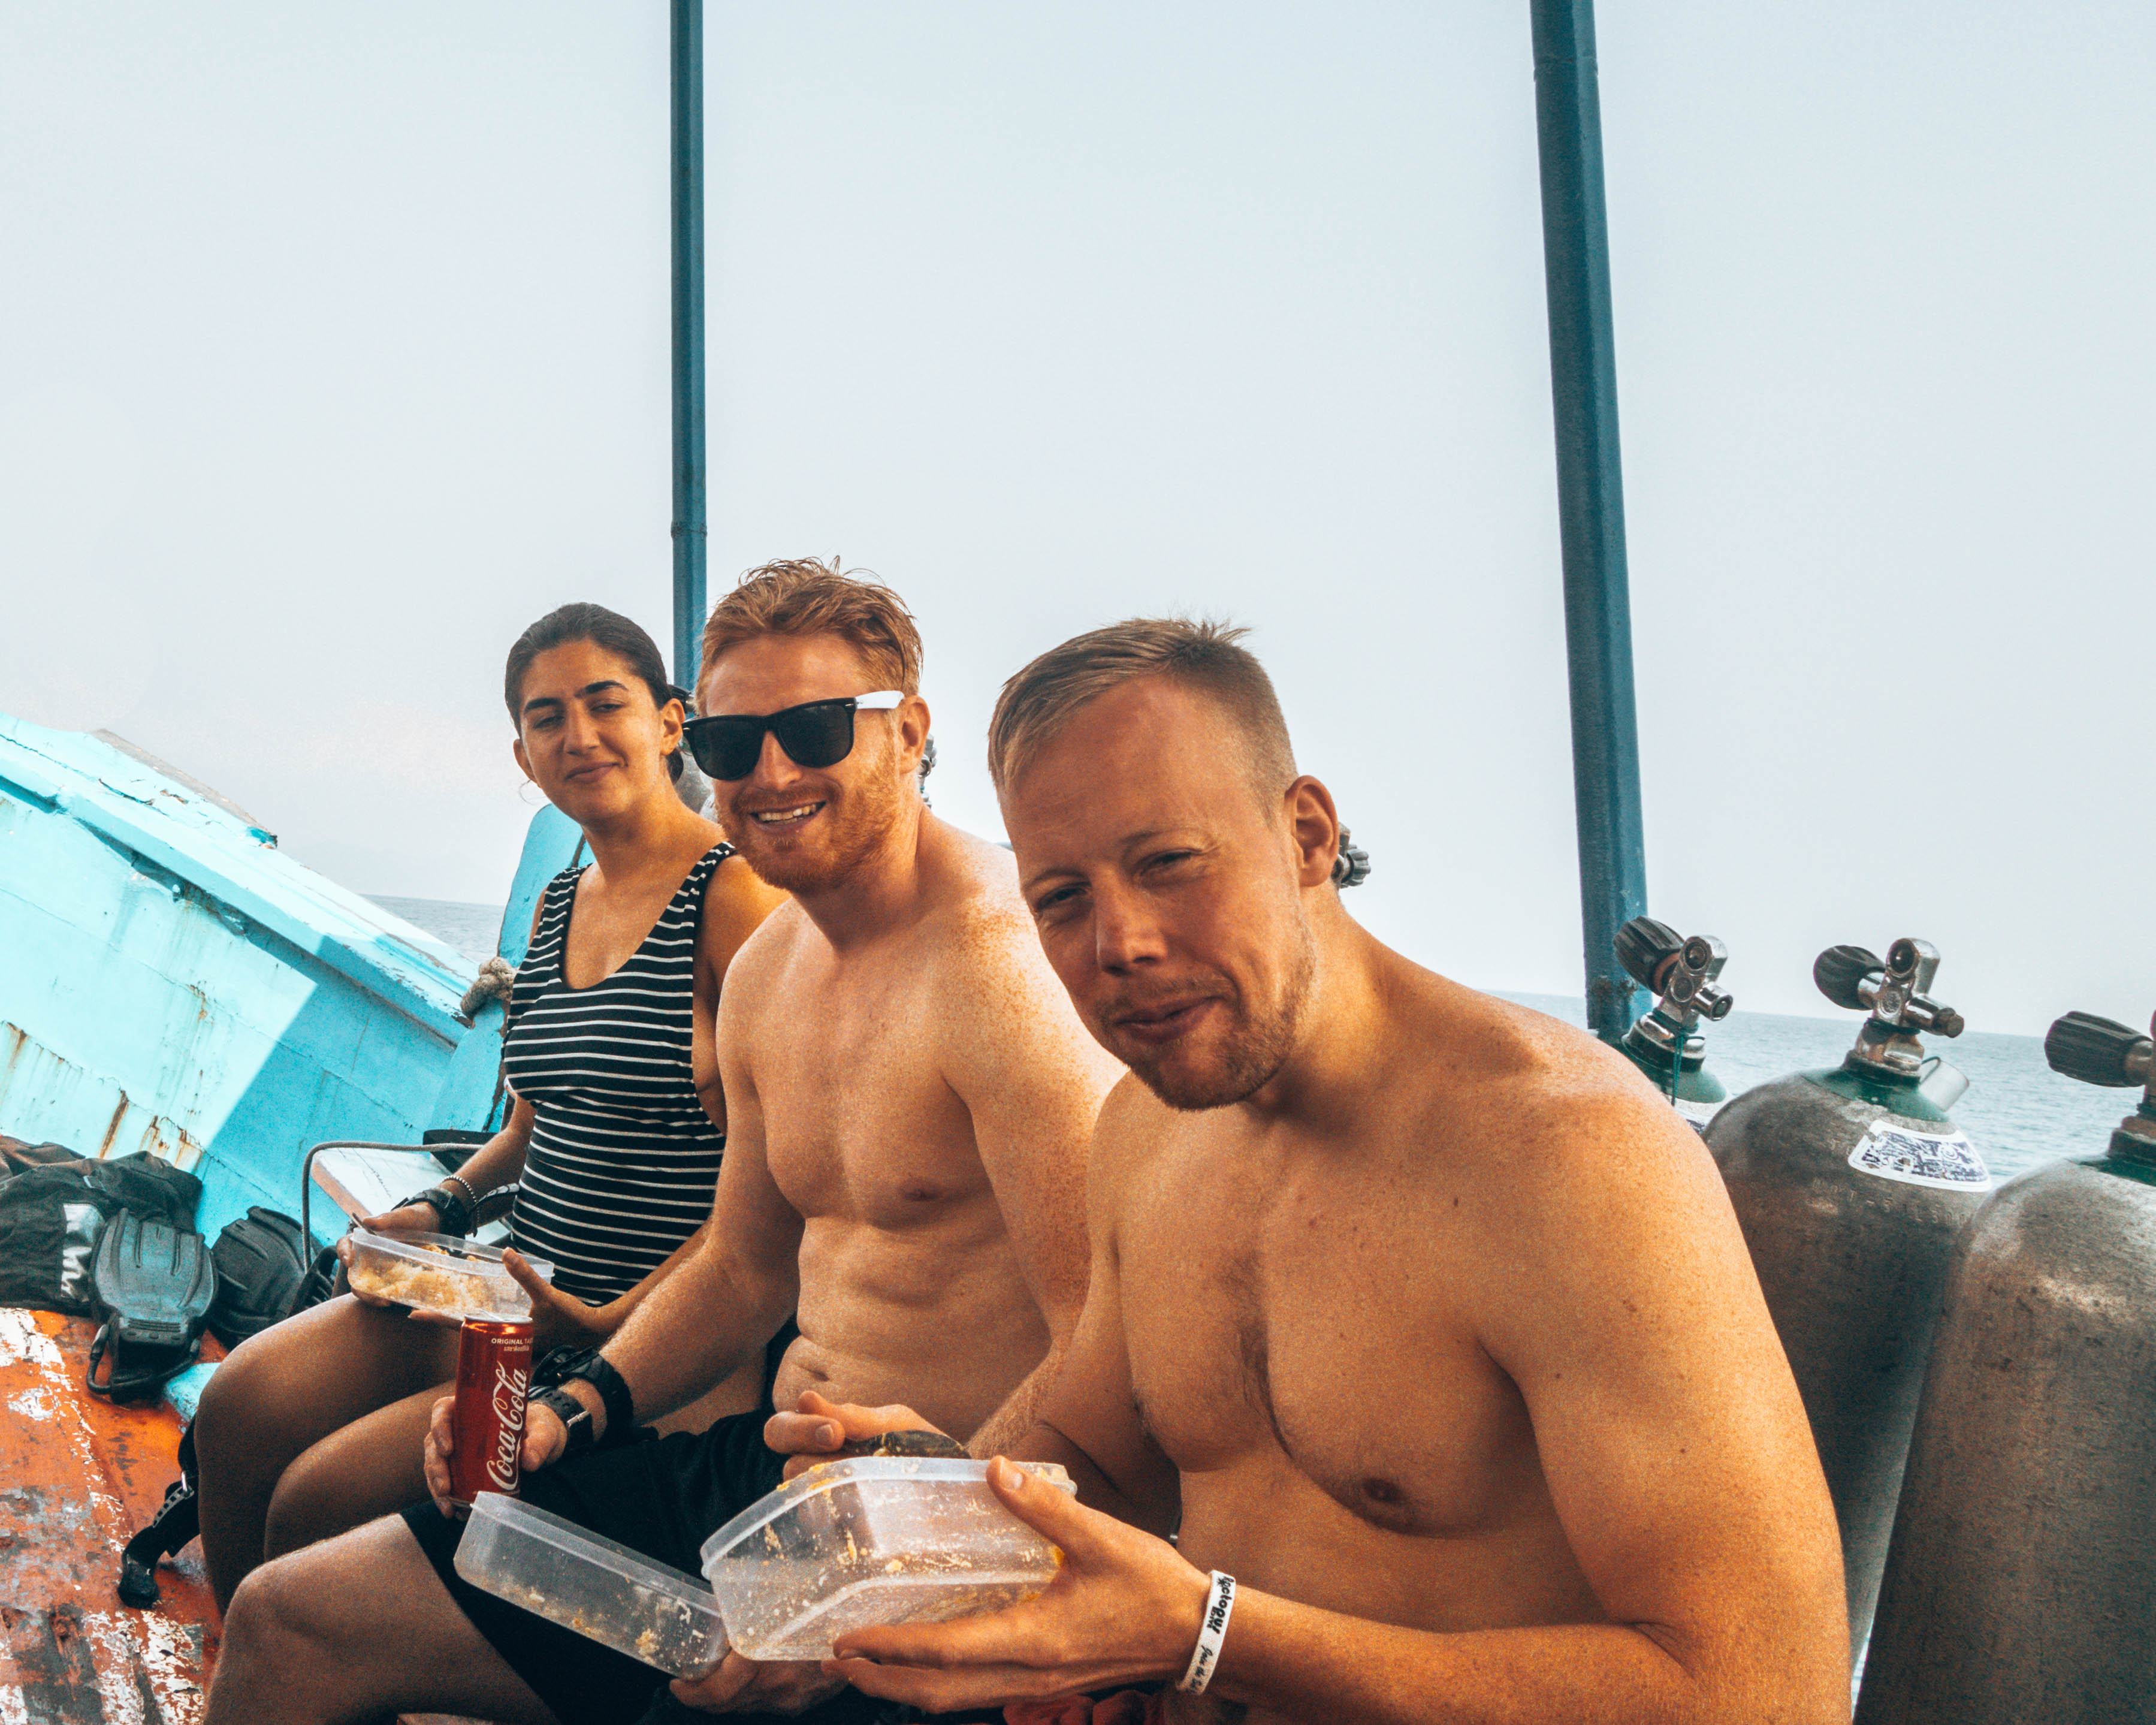 Our Swedish friends when scuba diving in Koh Tao, Thailand